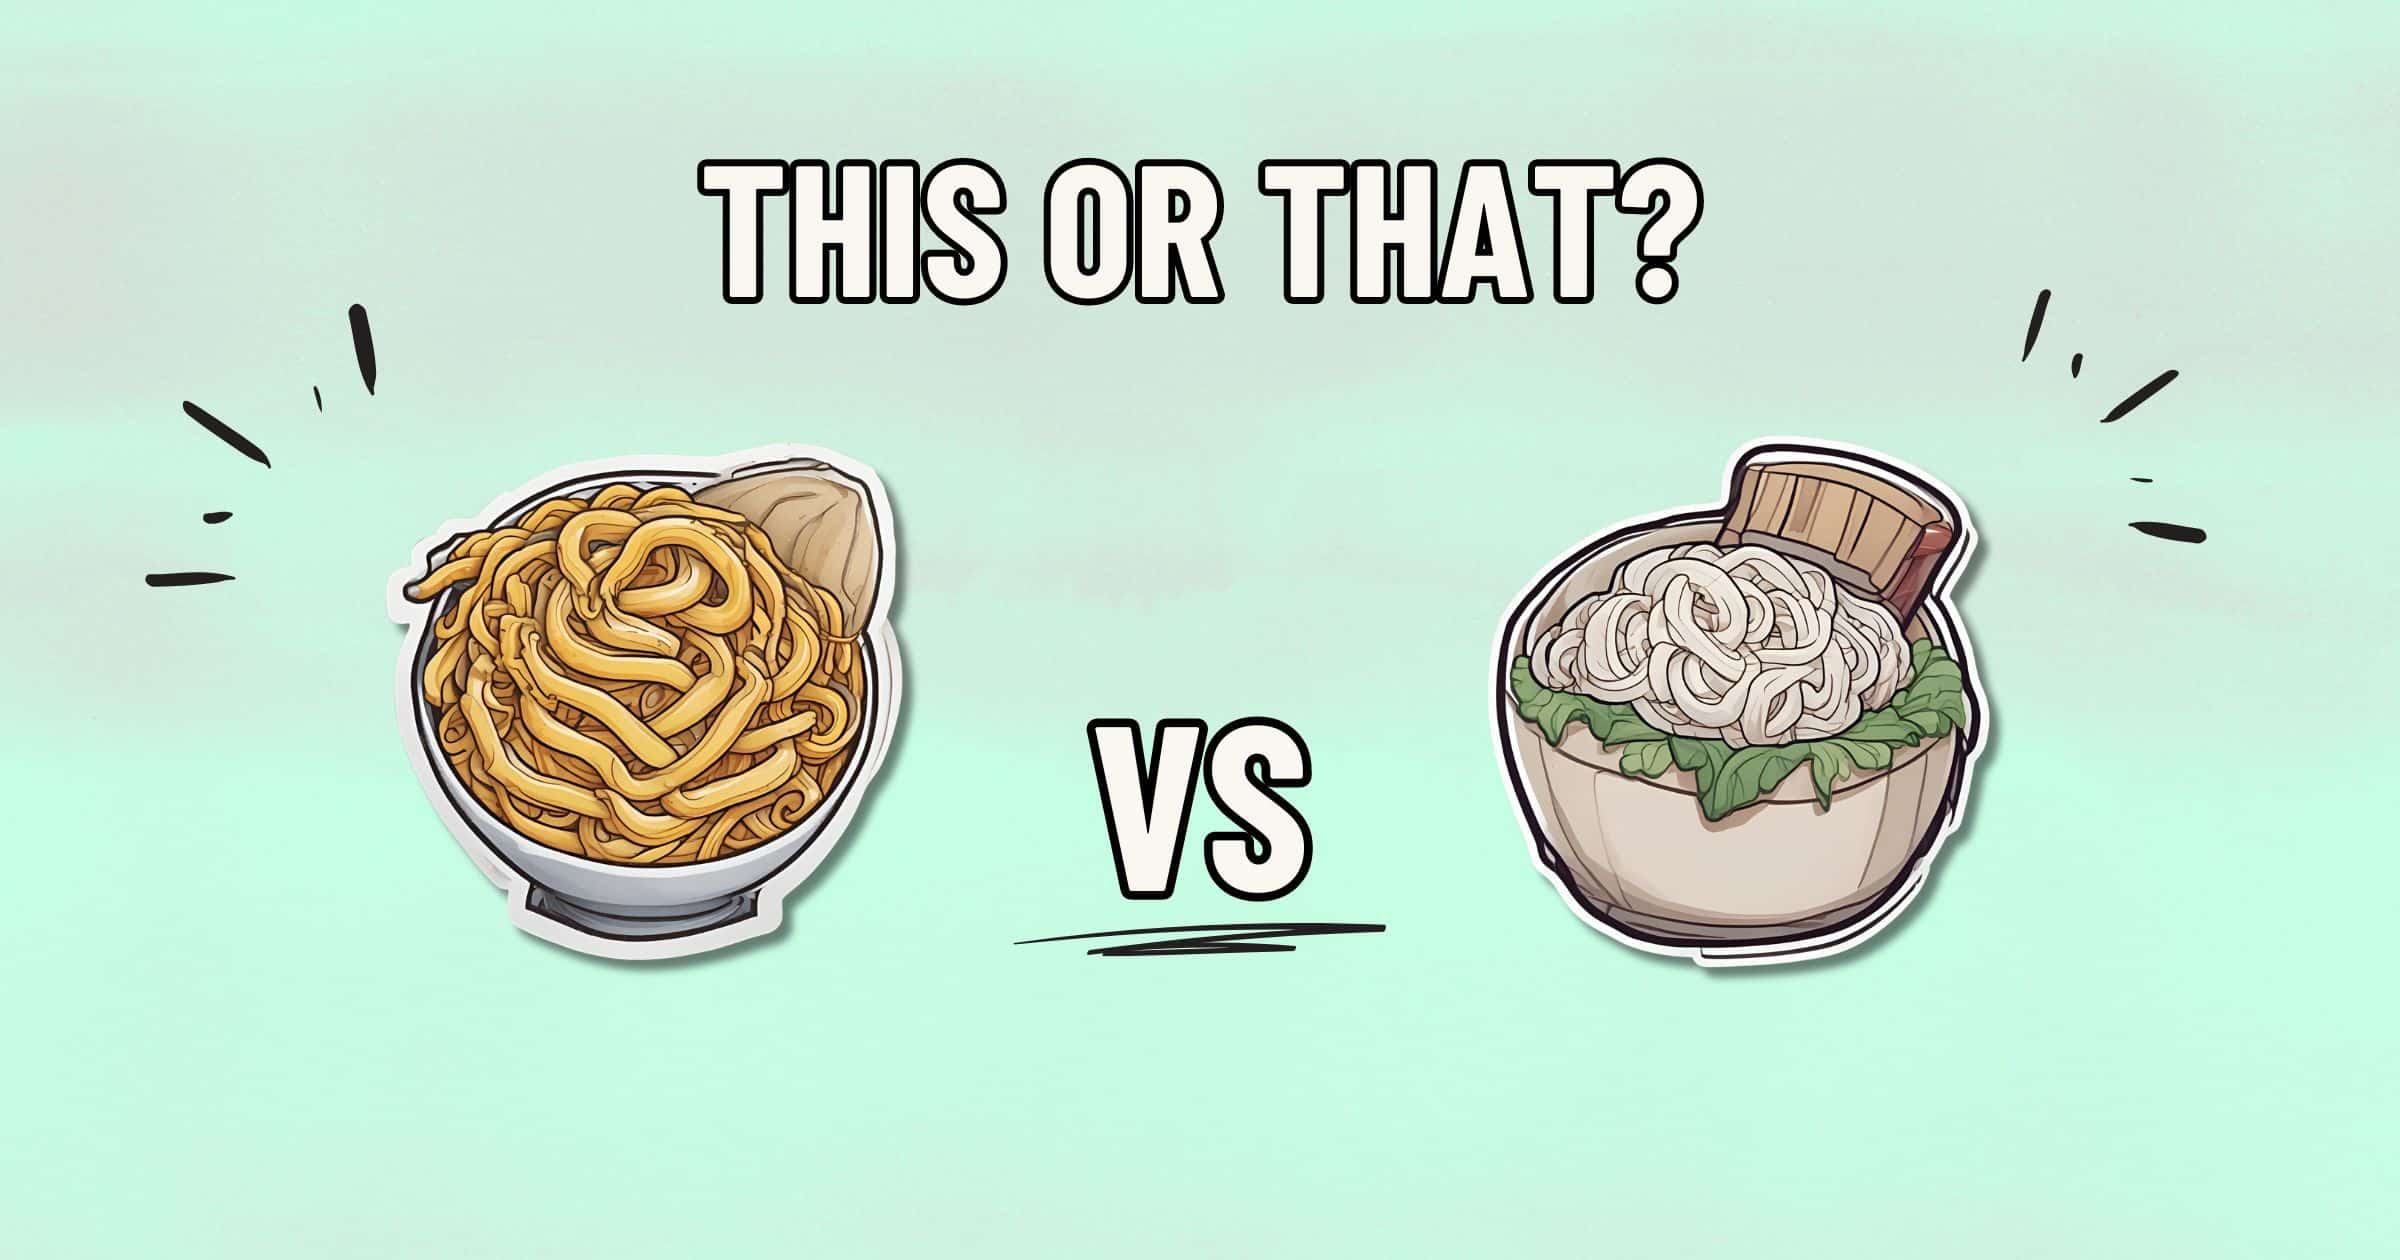 Illustrated image with the text "This or That?" at the top. Below, there are two bowls labeled "VS" in the center. The left bowl contains a serving of pasta, while the right bowl features a healthier option: rice noodles with green leafy vegetables and a wooden object.